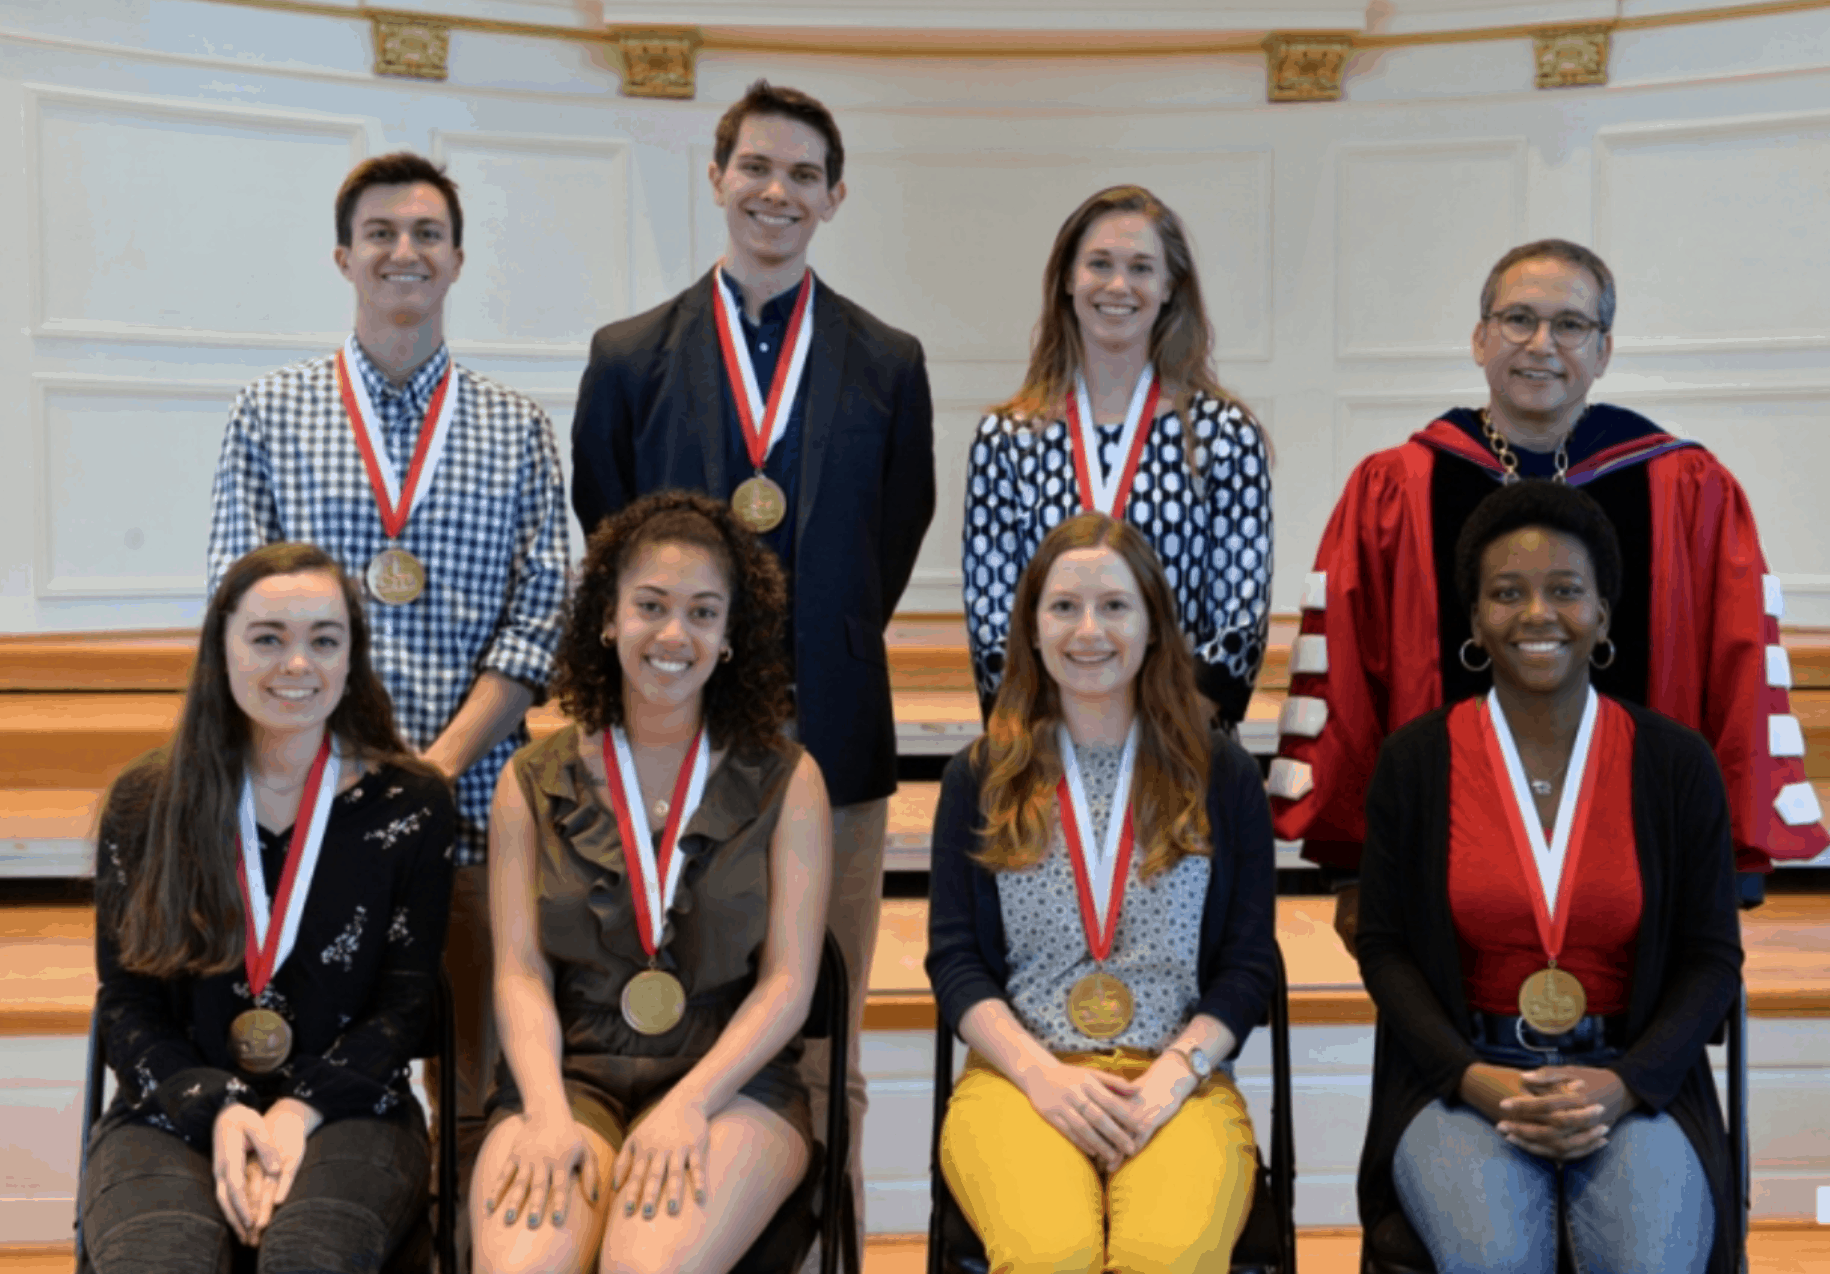 Academic Award Convocation recognizes excellence at Denison The